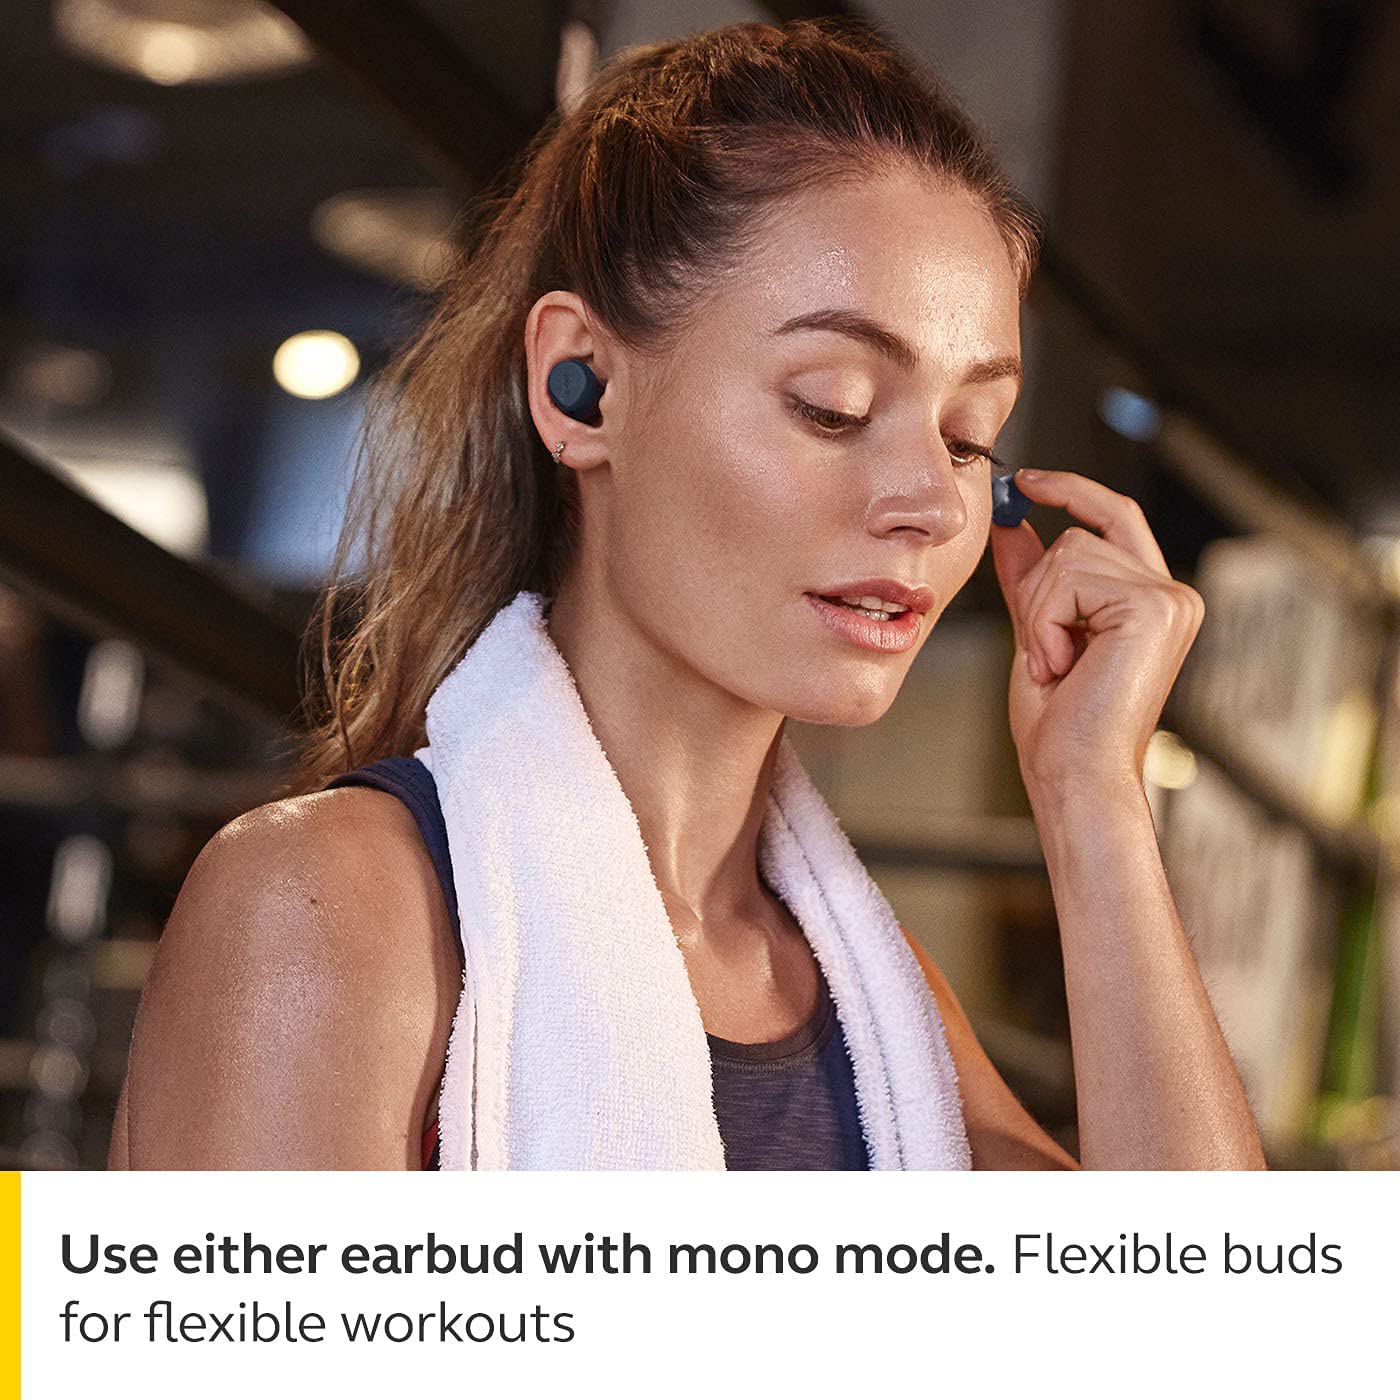 Jabra Elite 7 Active In-Ear Bluetooth Earbuds - True Wireless Sports Ear Buds with Jabra Shakegrip for the Ultimate Active Fit and Adjustable Active Noise Cancellation - Navy Animals & Pet Supplies > Pet Supplies > Dog Supplies > Dog Treadmills Jabra   